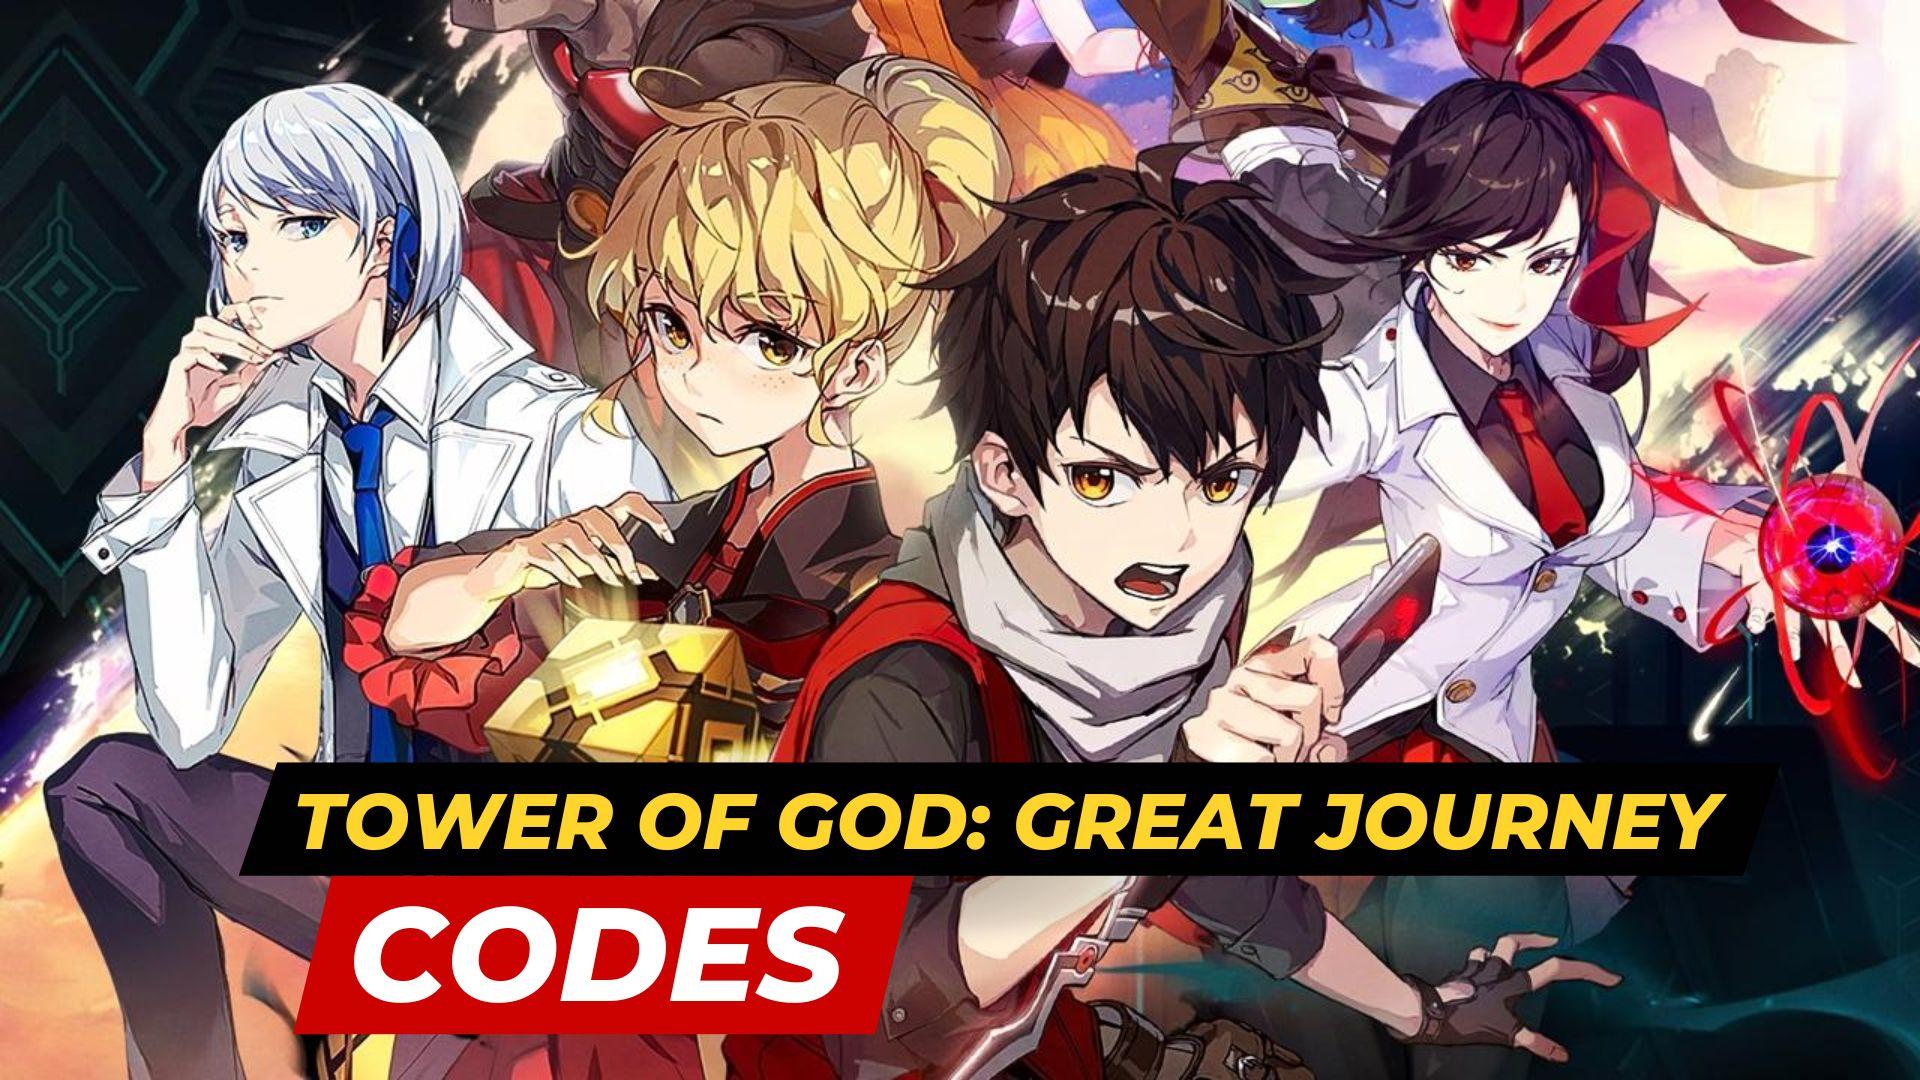 Tower of God: Great Journey - Game Guides, News and Updates